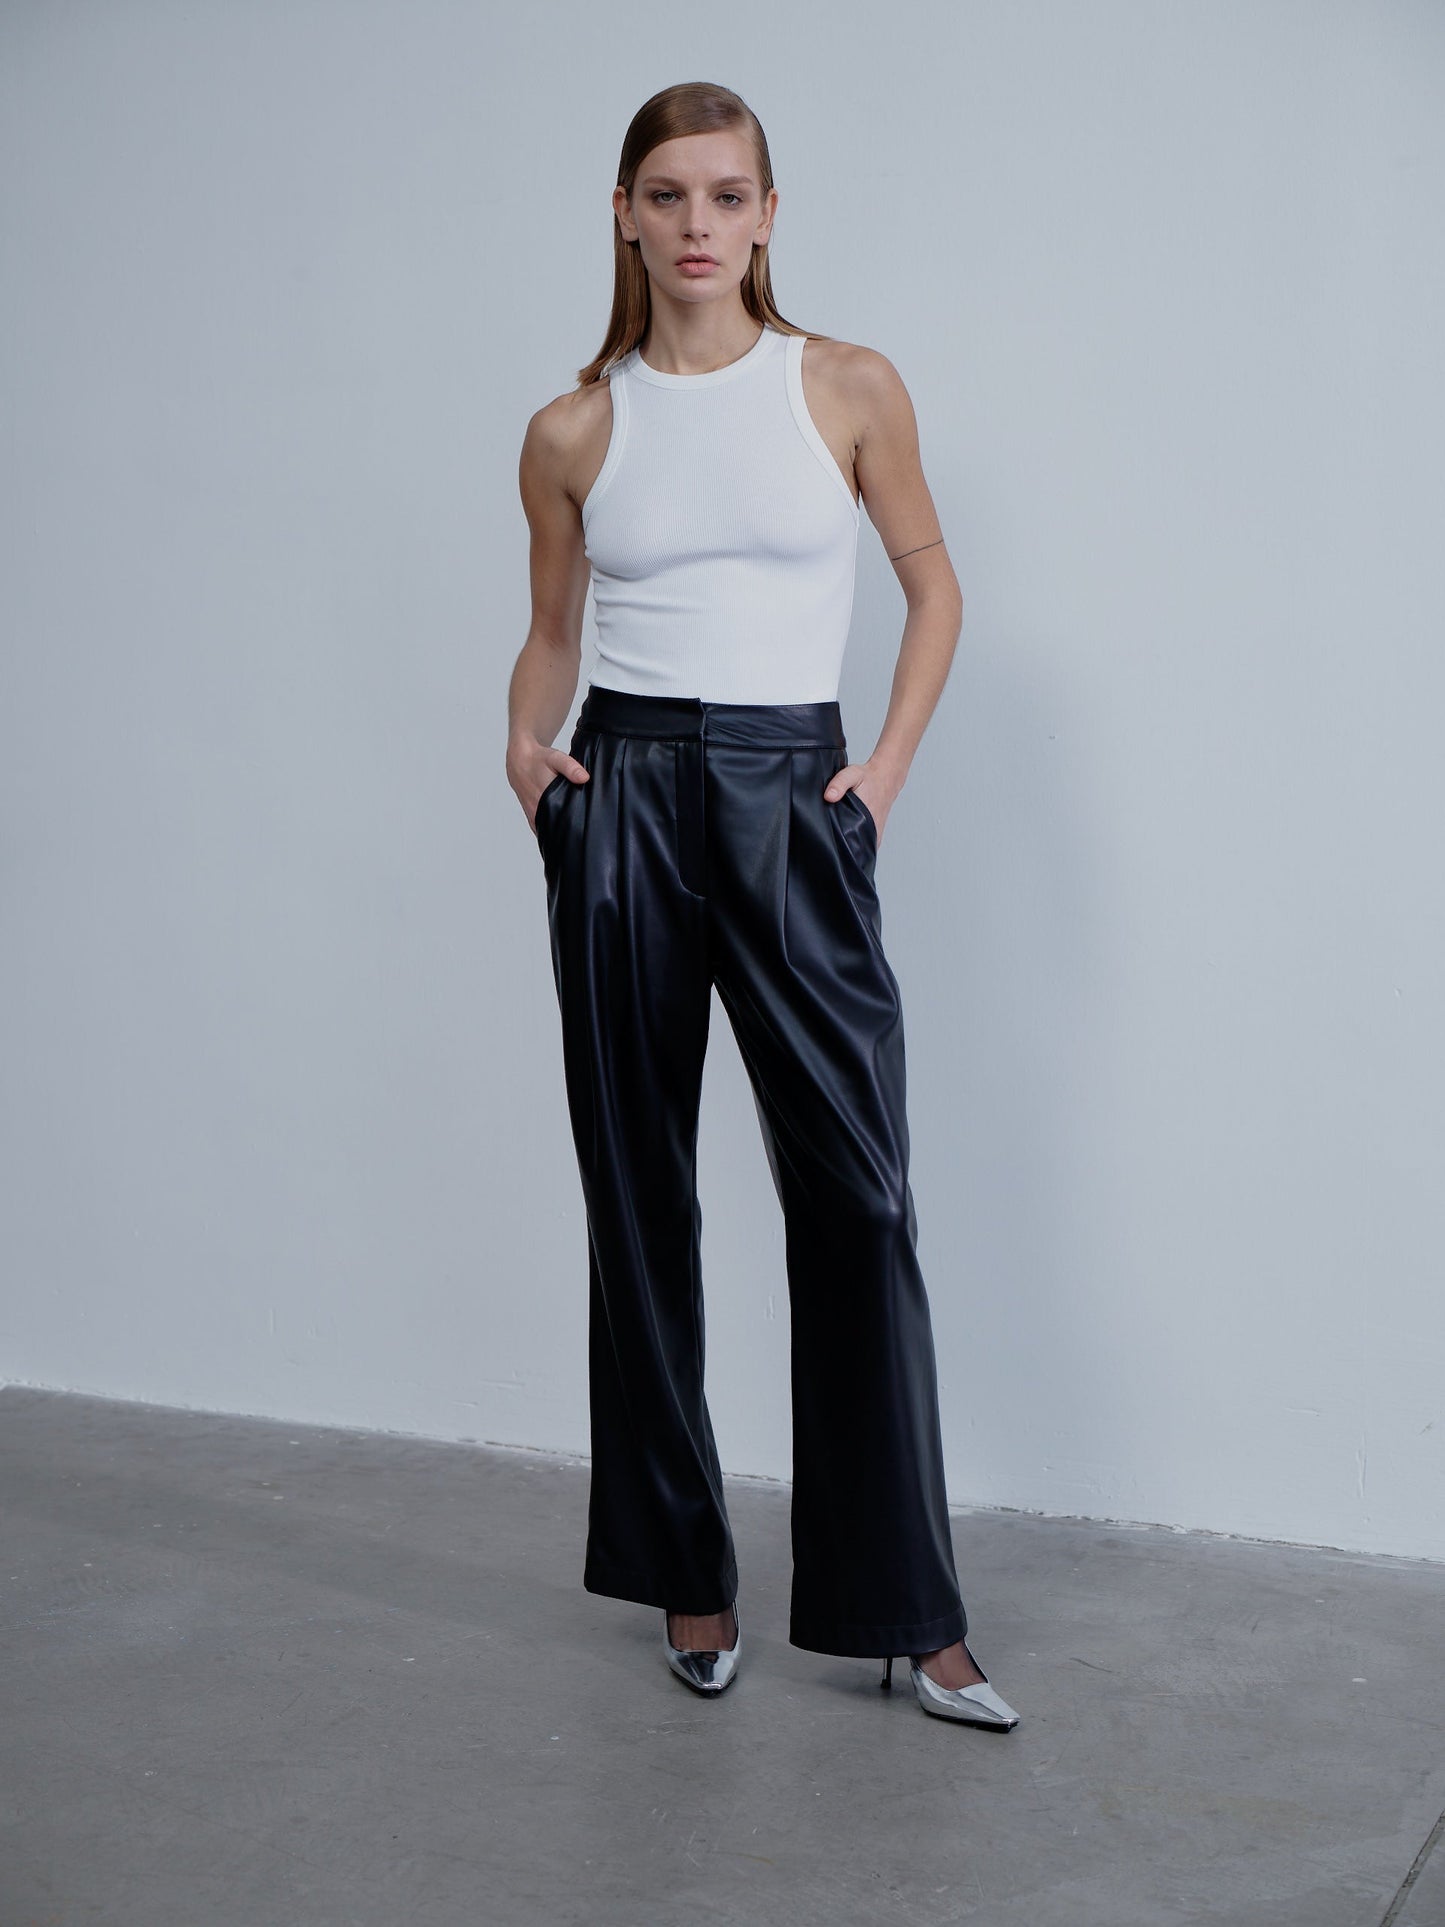 Tina Vegan Leather Trousers in Noire